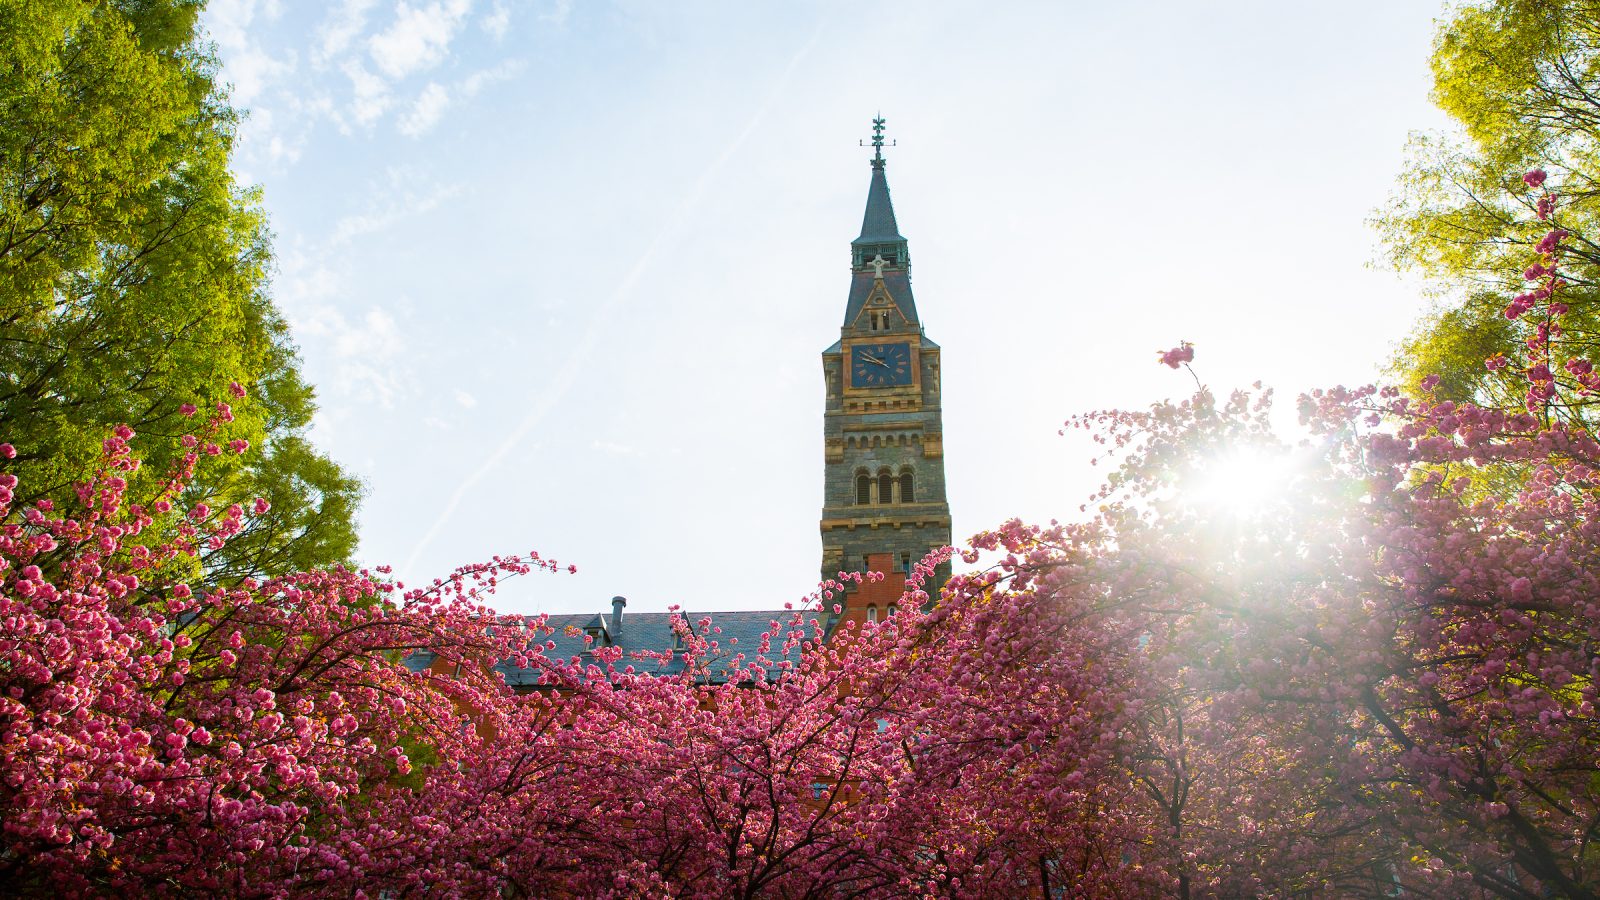 Sun shines behind trees blooming with flowers in front of a tall clock tower